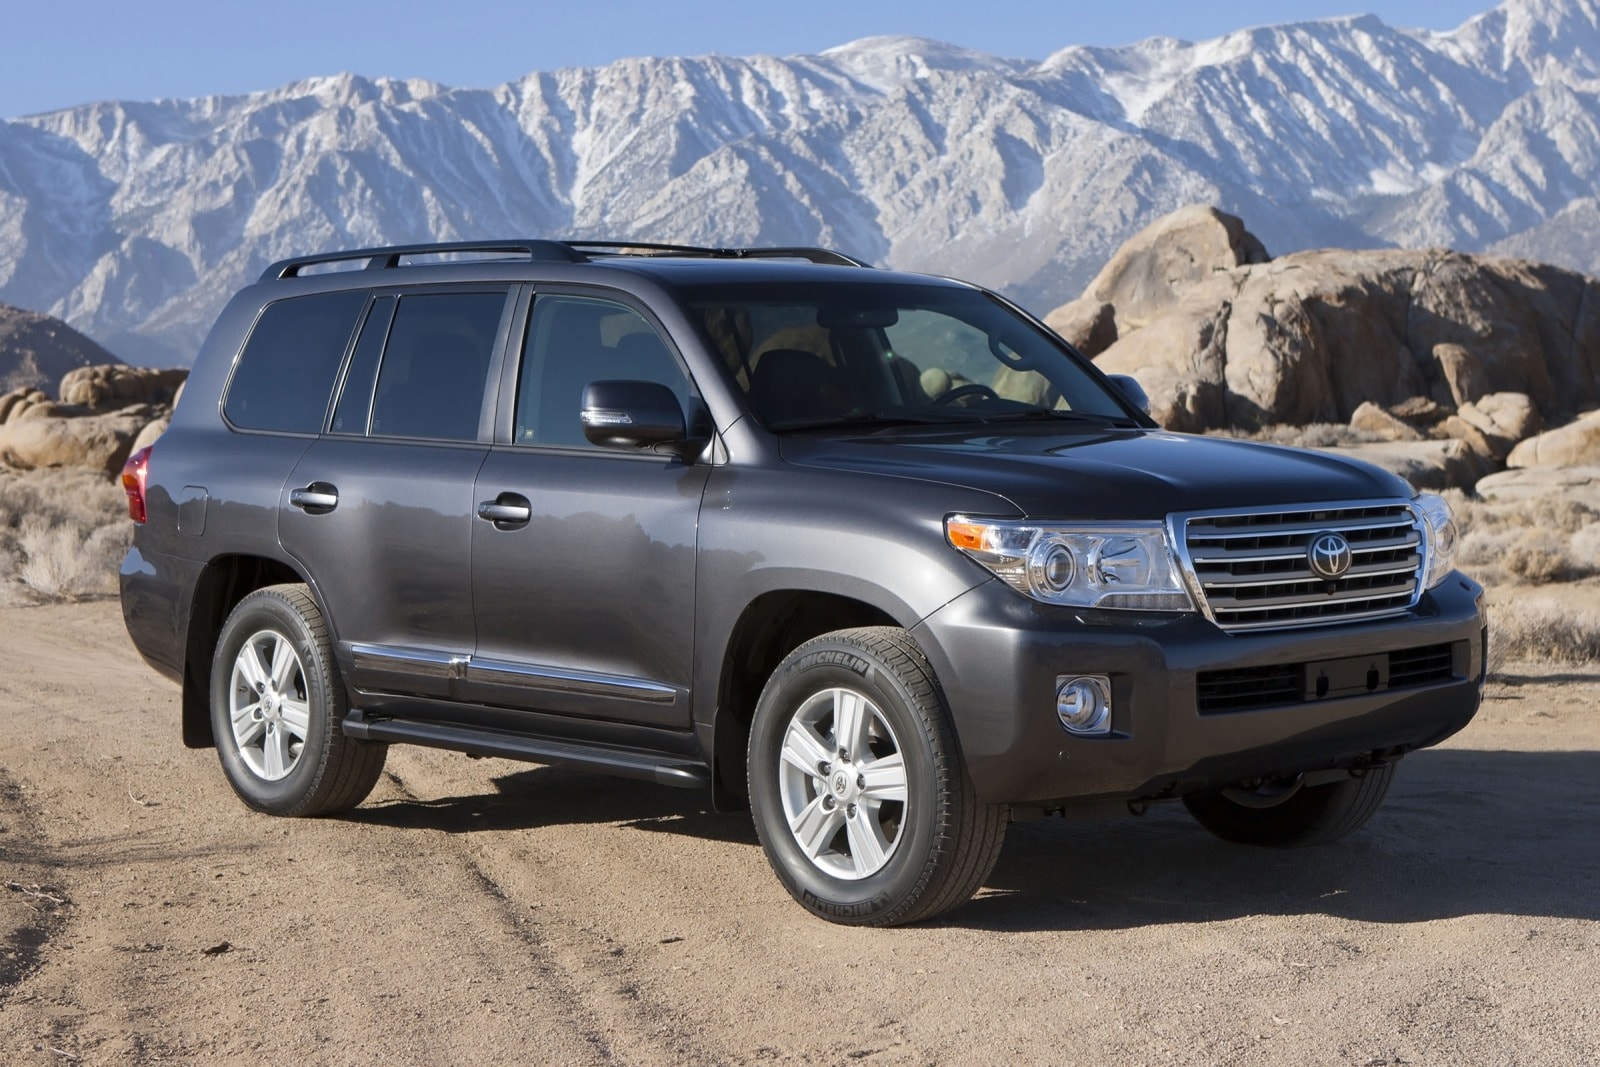 2013 Toyota Land Cruiser Review & Ratings | Edmunds